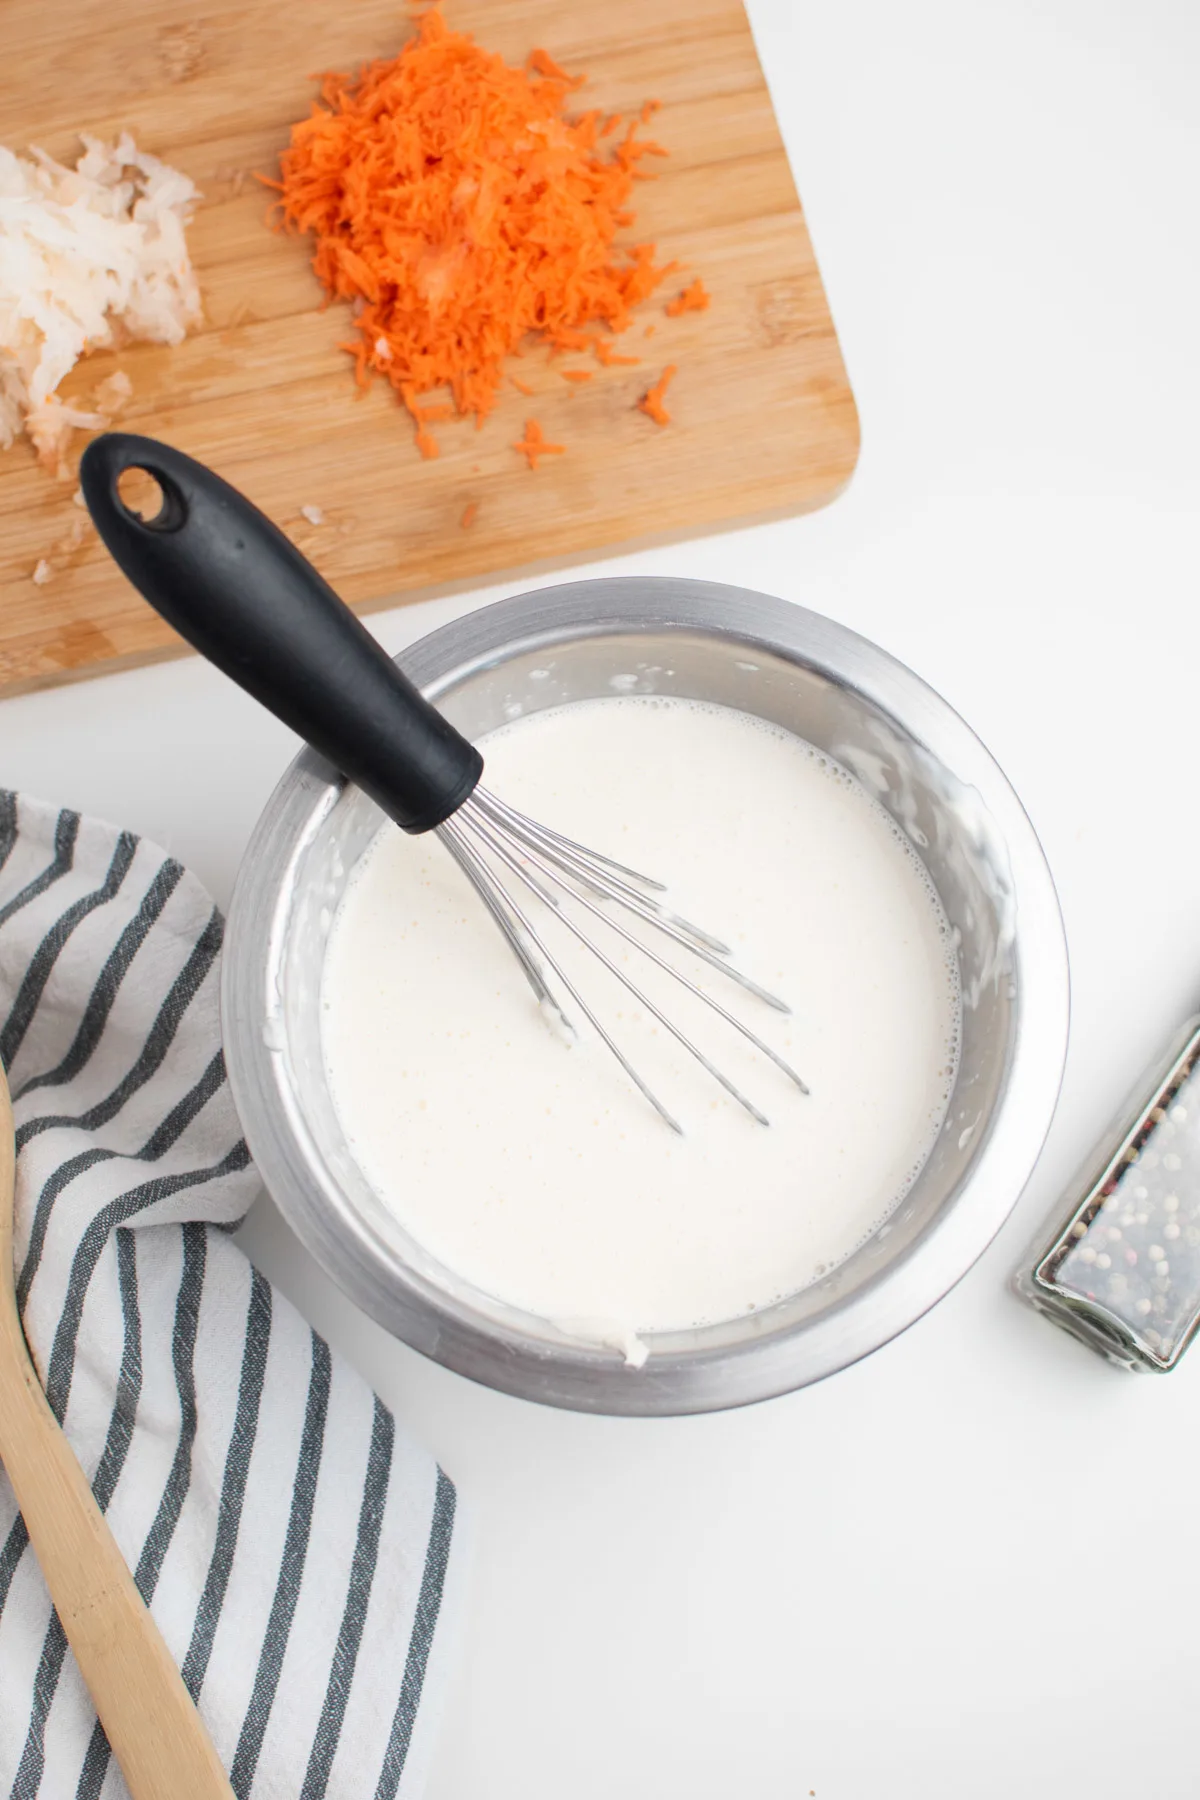 Creamy mayo dressing mixture in small bowl with whisk next to cutting board.